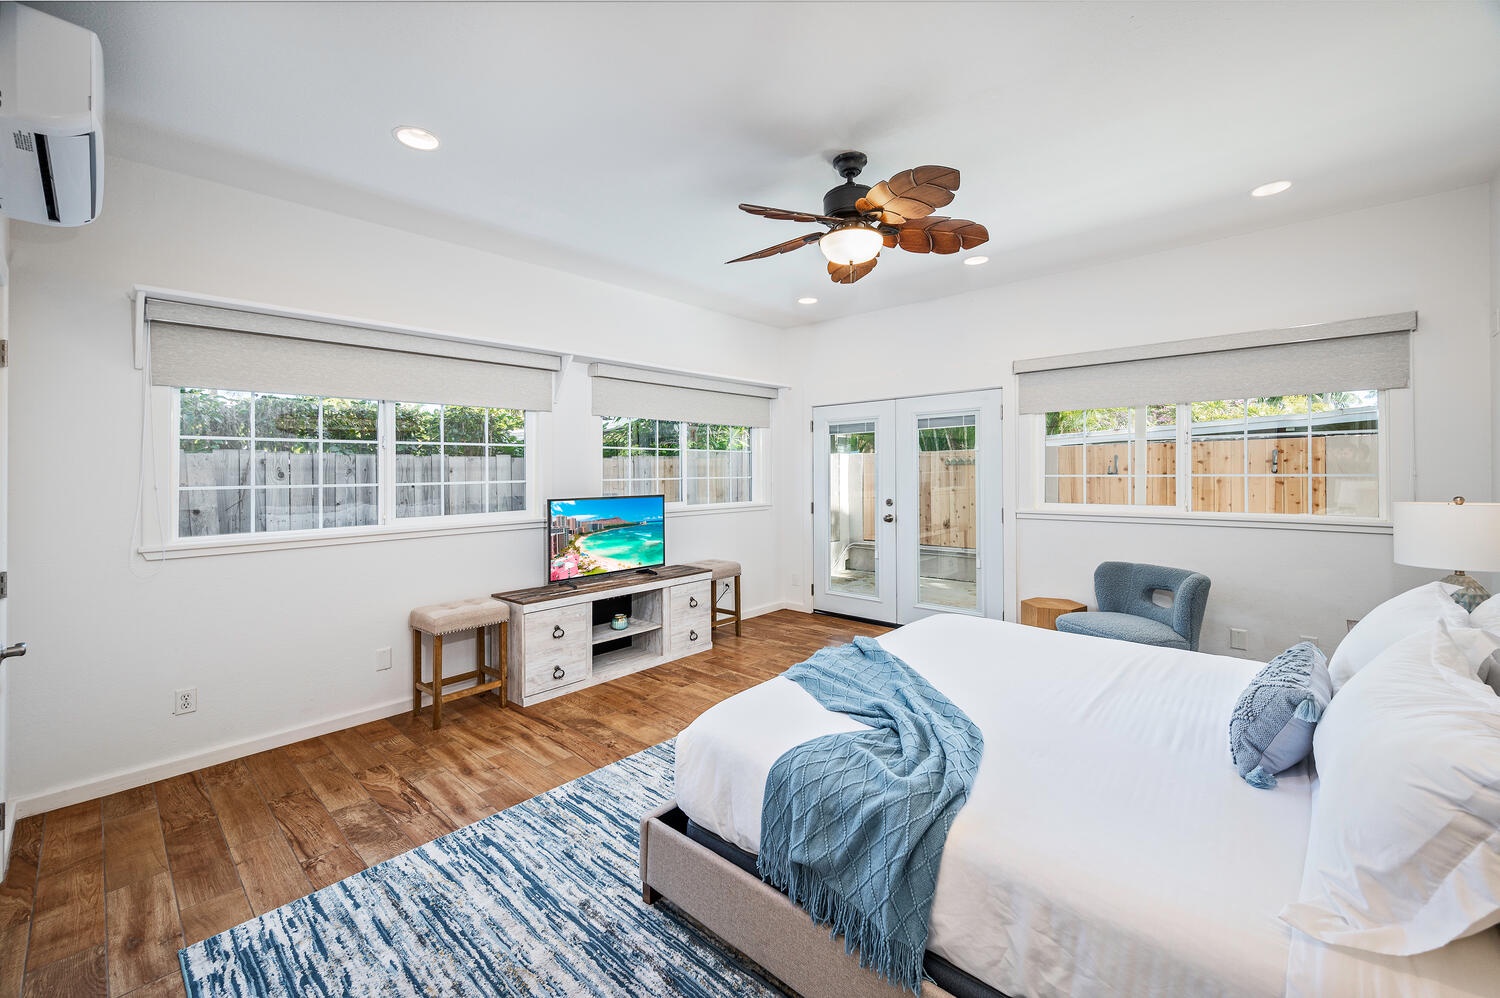 Kailua Vacation Rentals, Villa Hui Hou - Bedroom 5, King bed with a private entrance and ensuite